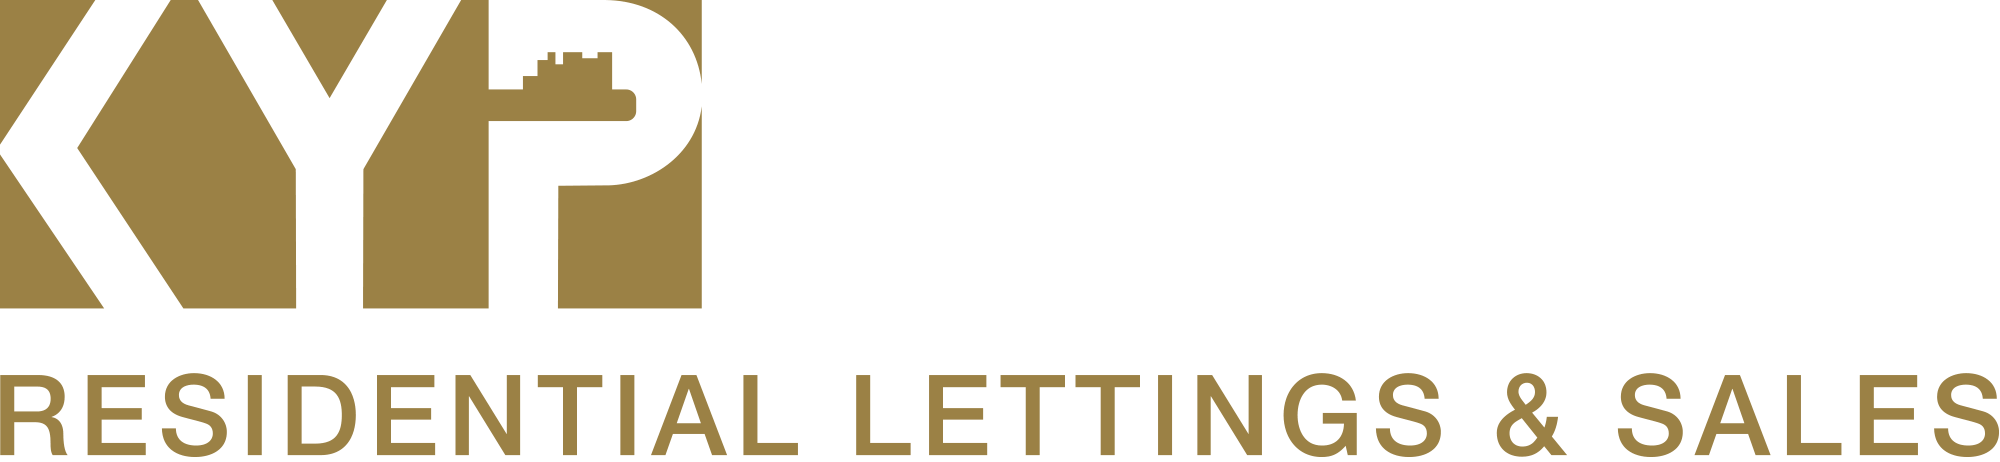 Kate Young Properties